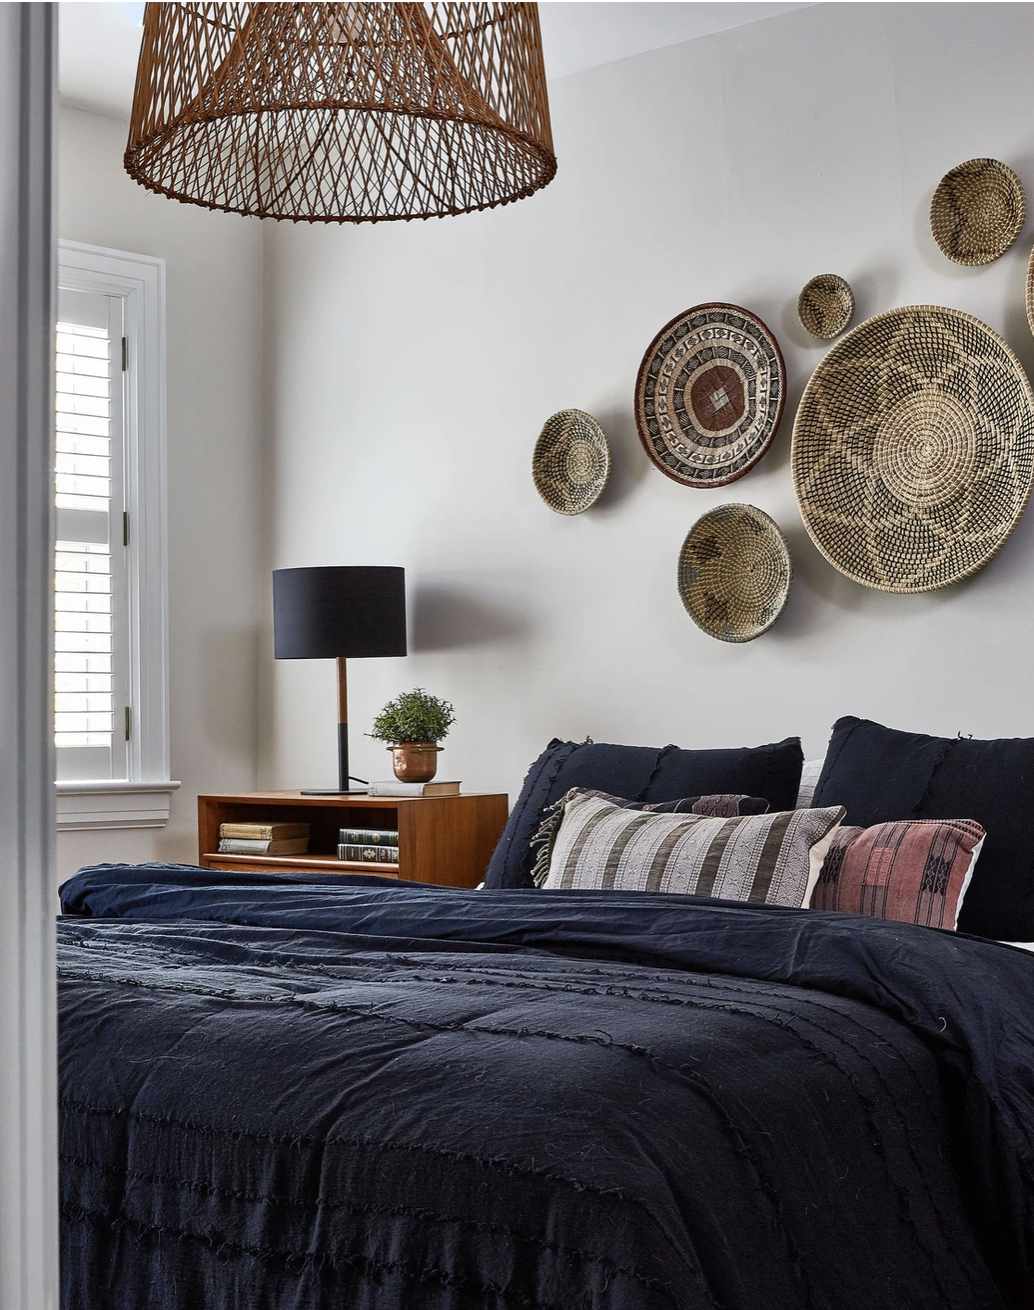 bedroom with navy comforter and gallery wall of baskets hanging above bed